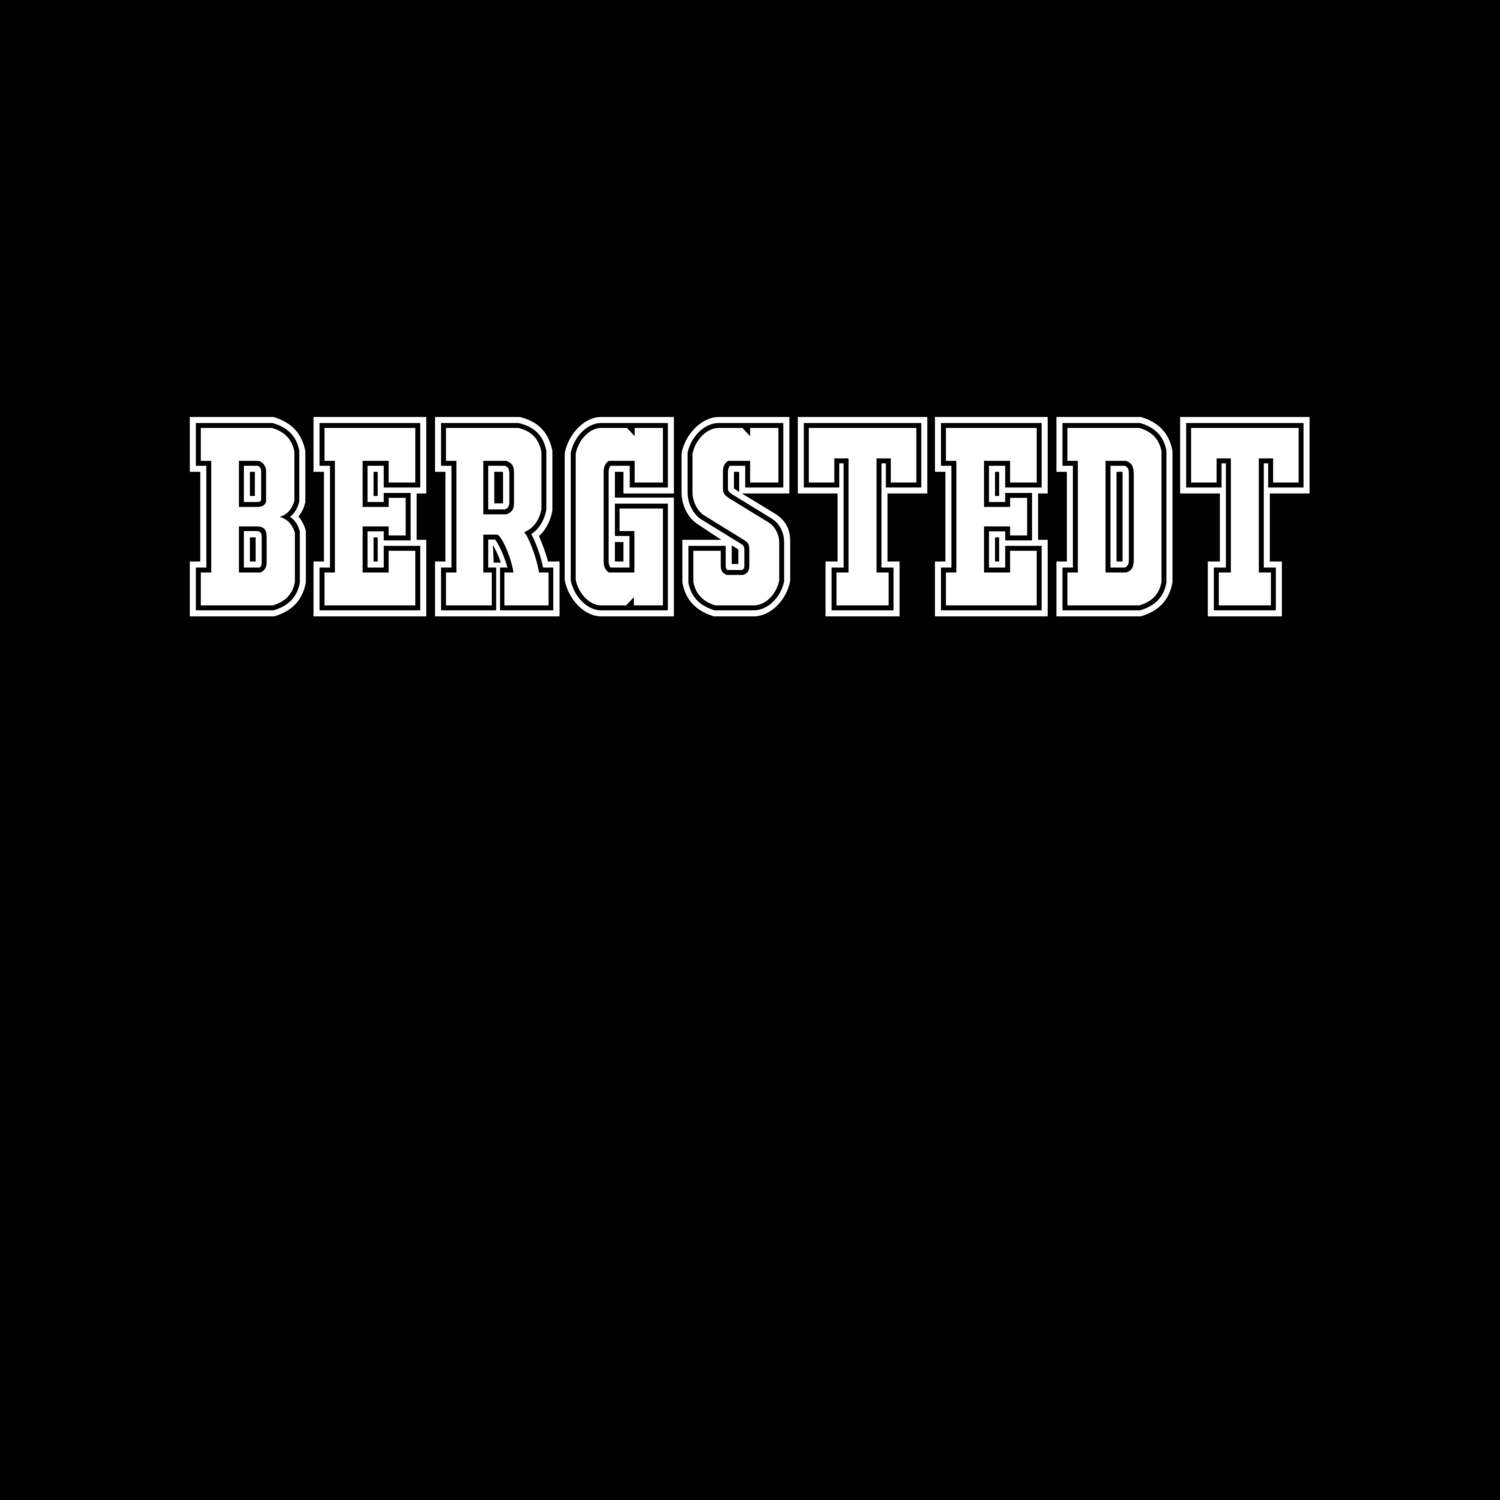 Bergstedt T-Shirt »Classic«